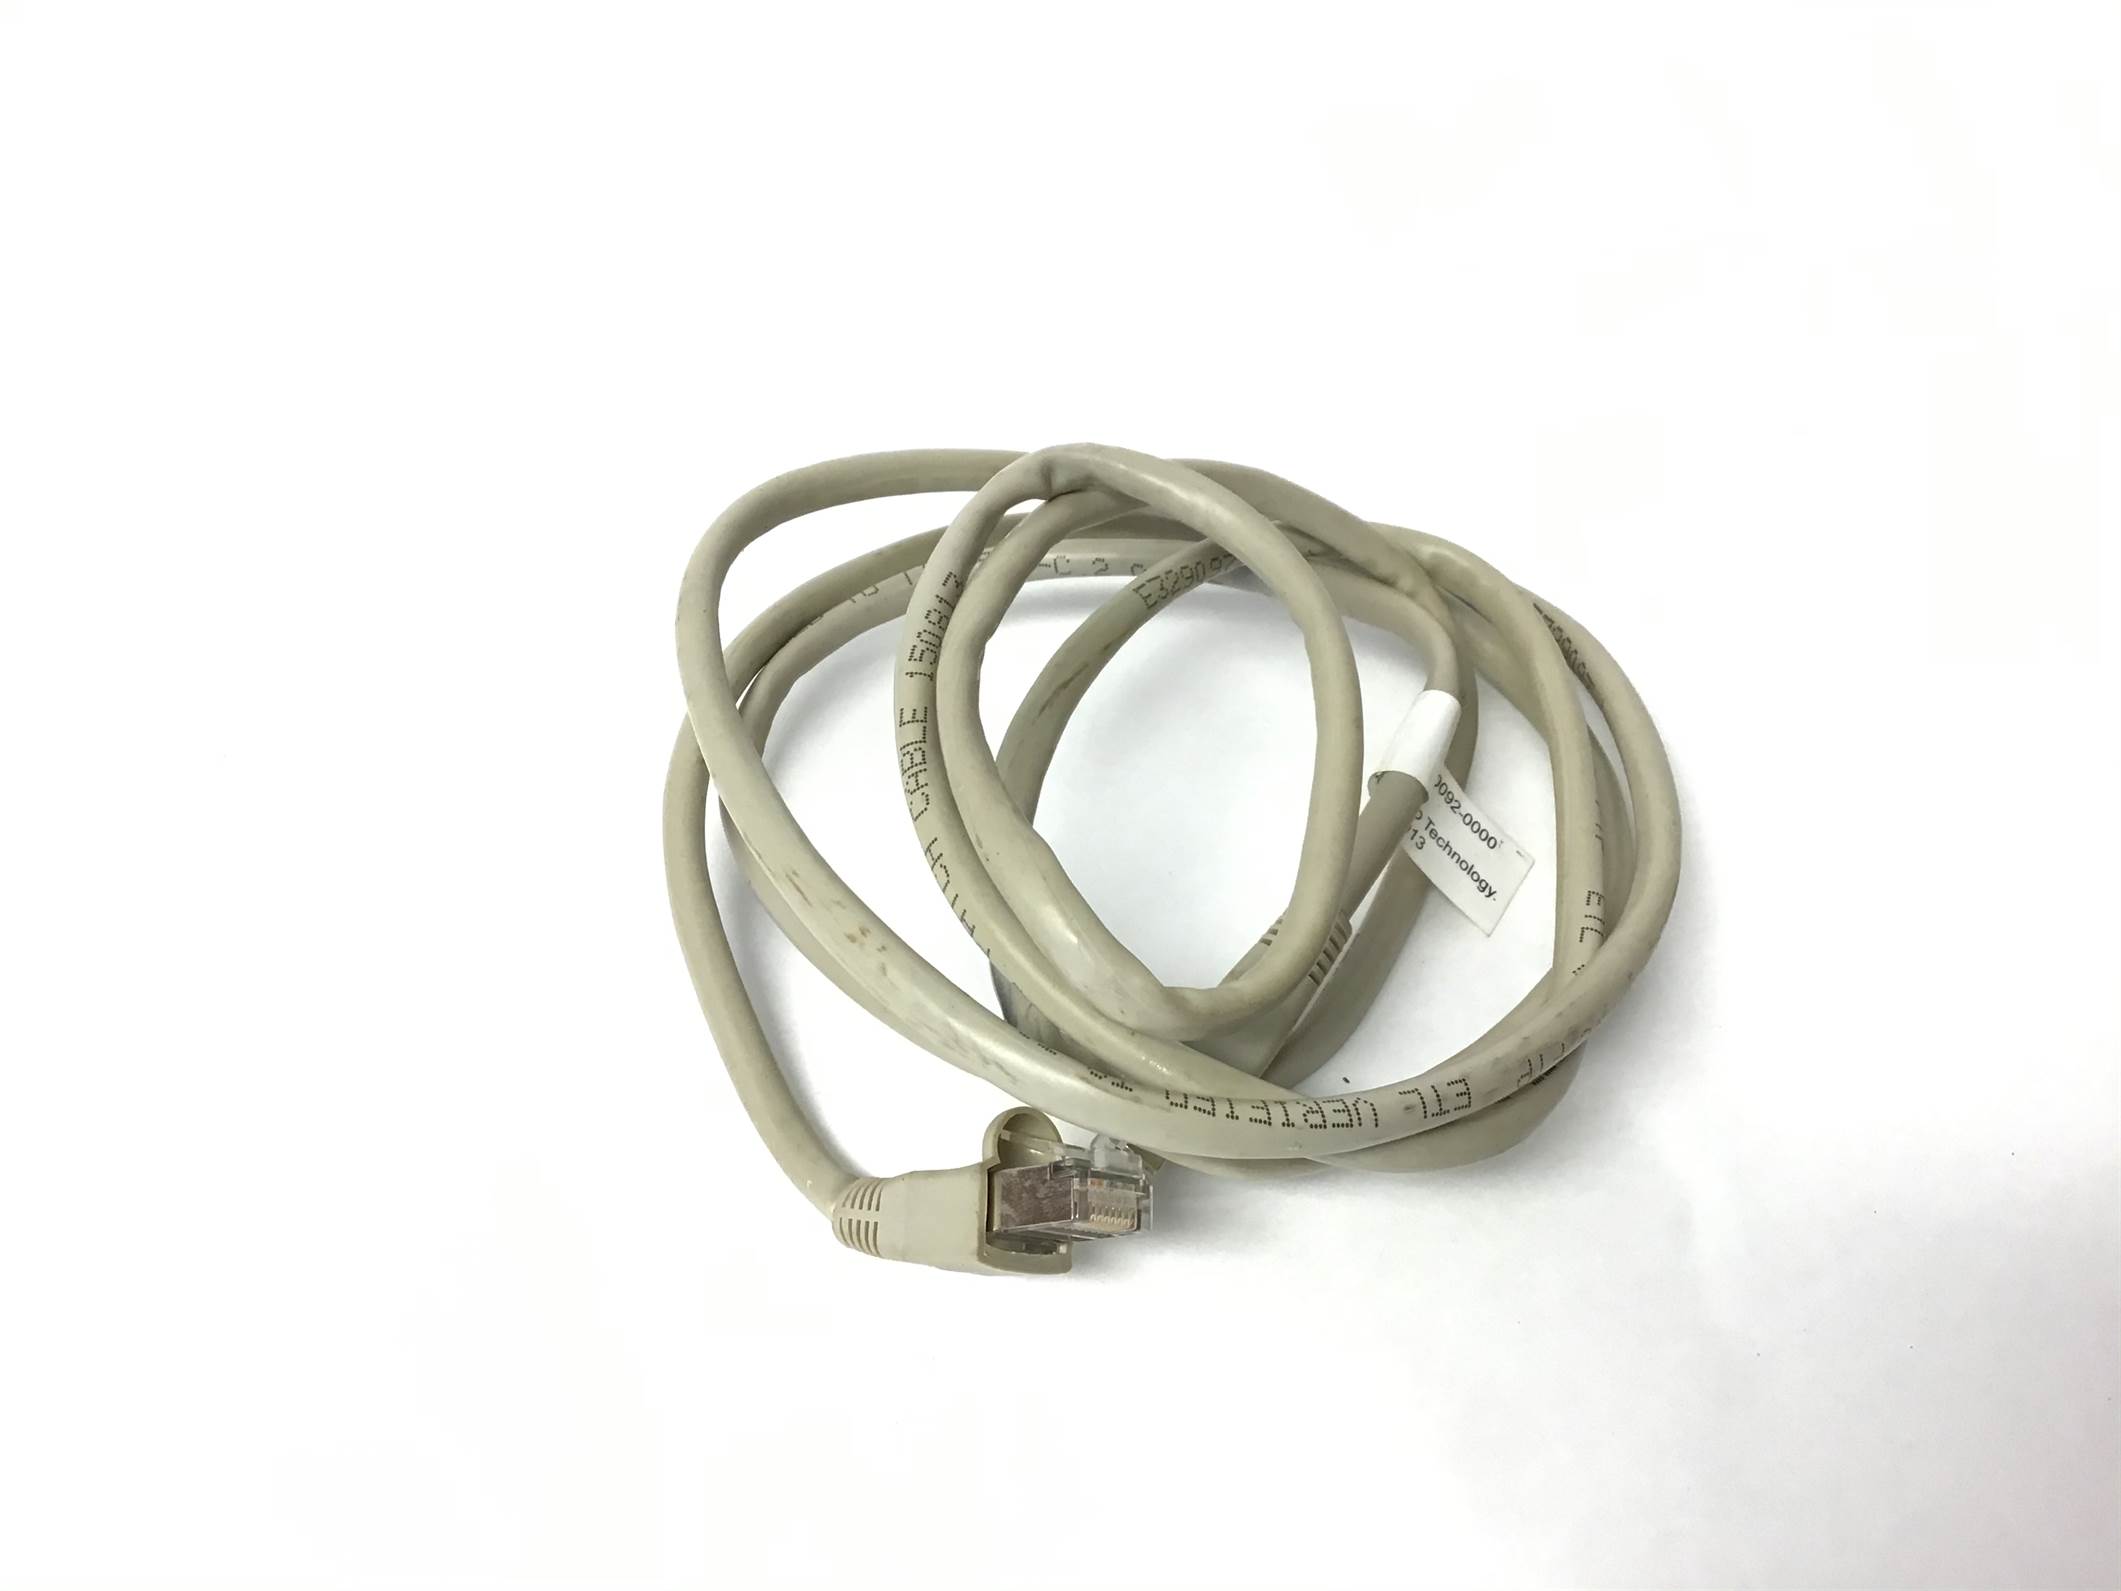 Cable Assembly CAT5E 84